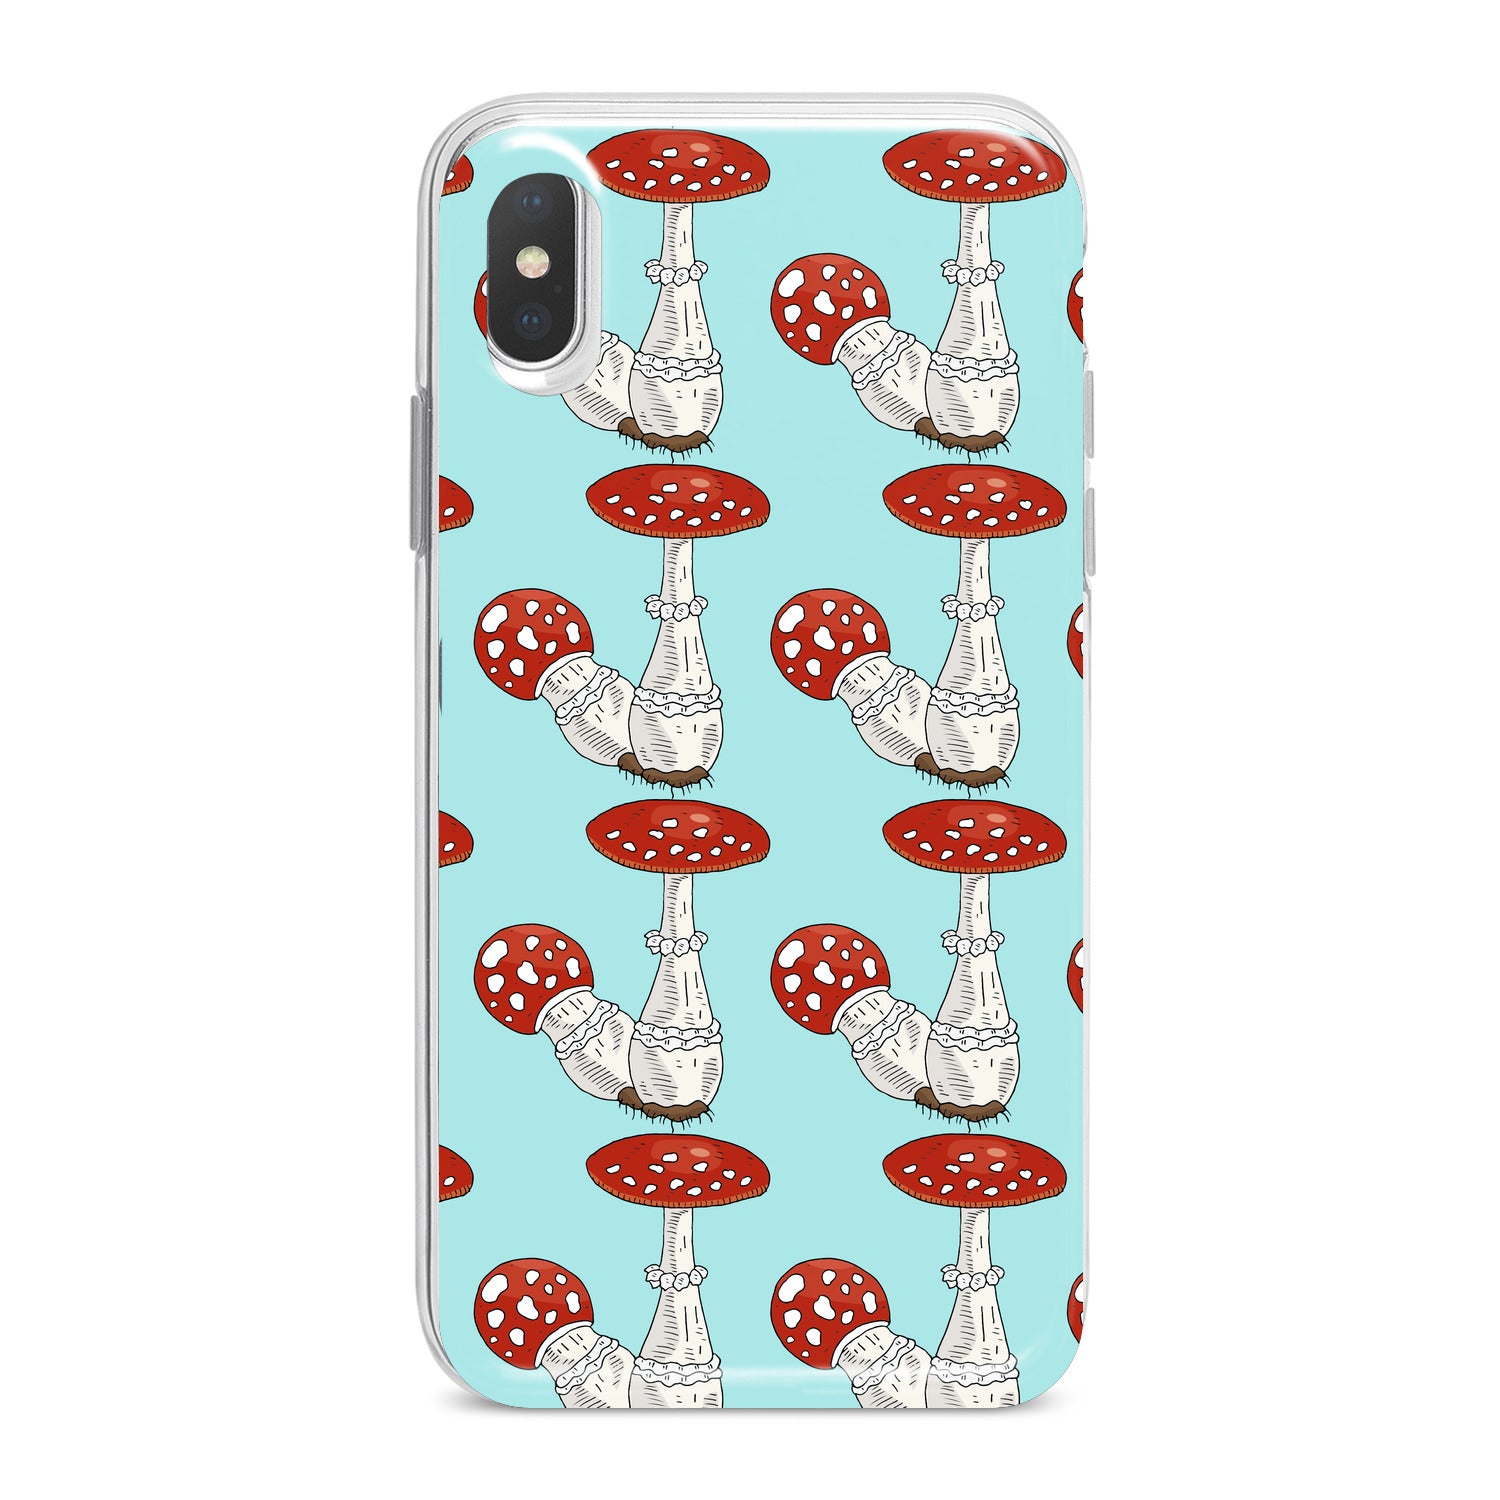 Lex Altern Bright Amanita Pattern Phone Case for your iPhone & Android phone.